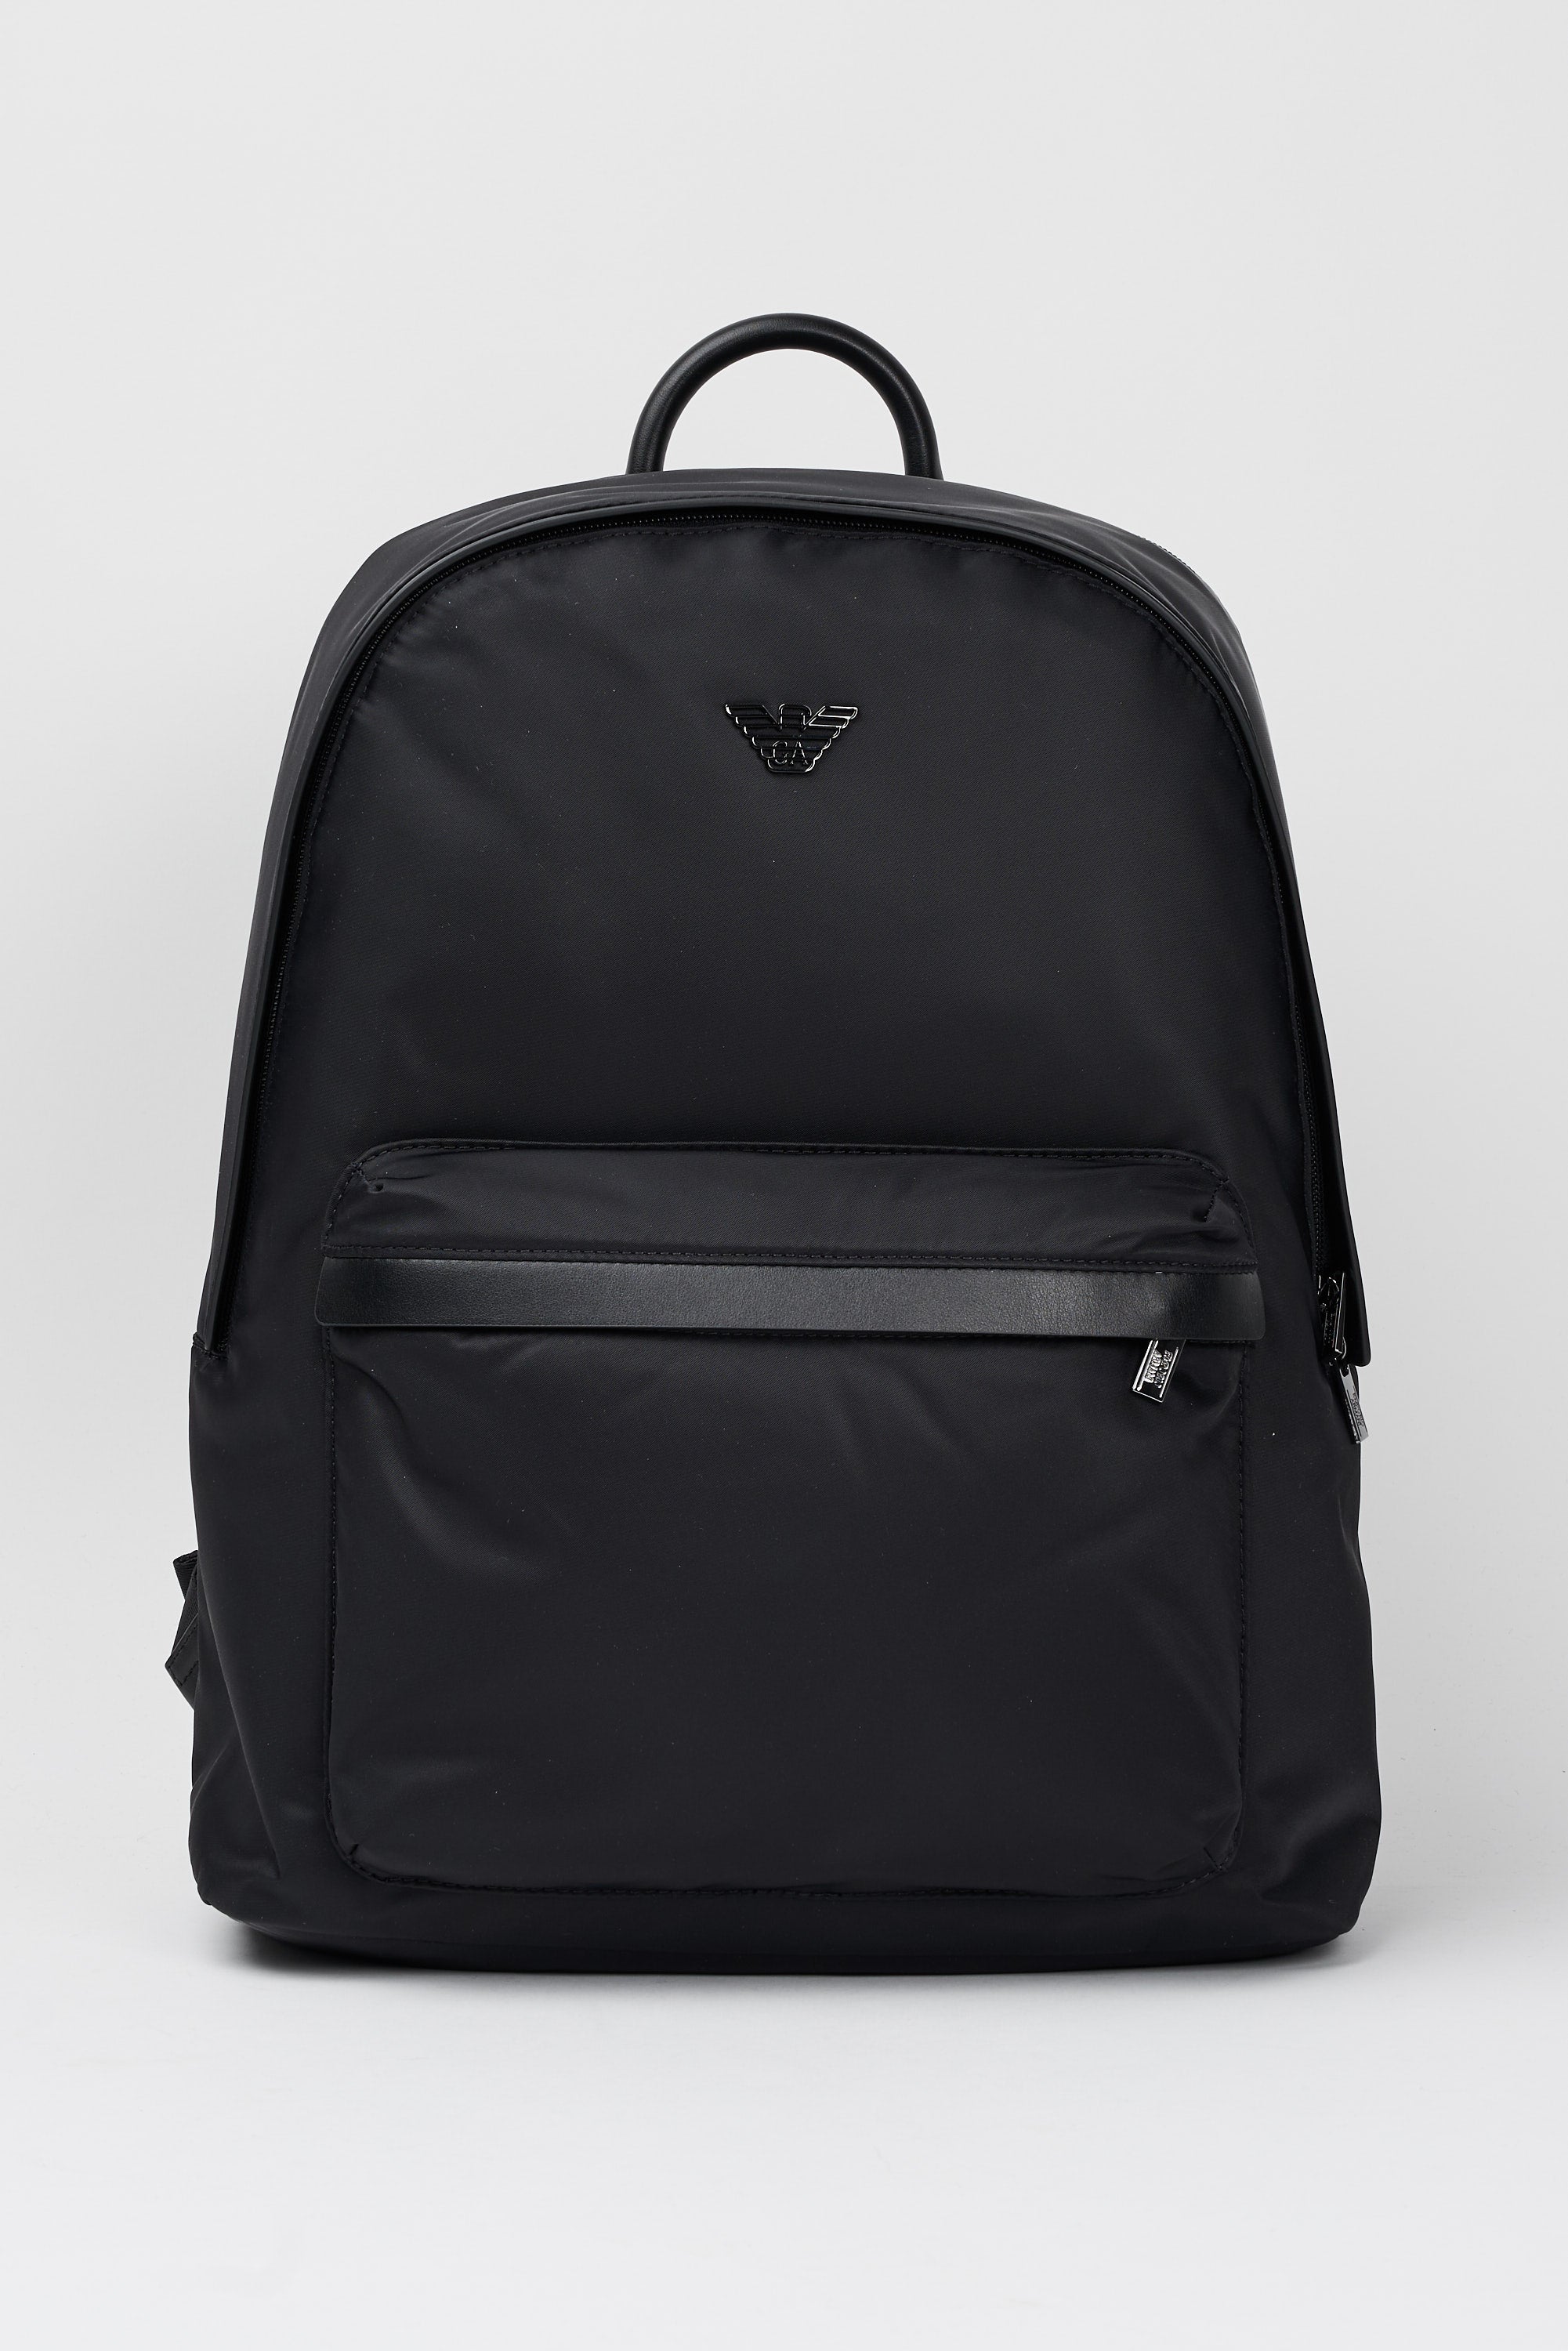 Emporio Armani Backpack Sustainability Values in Recycled Nylon Black-1